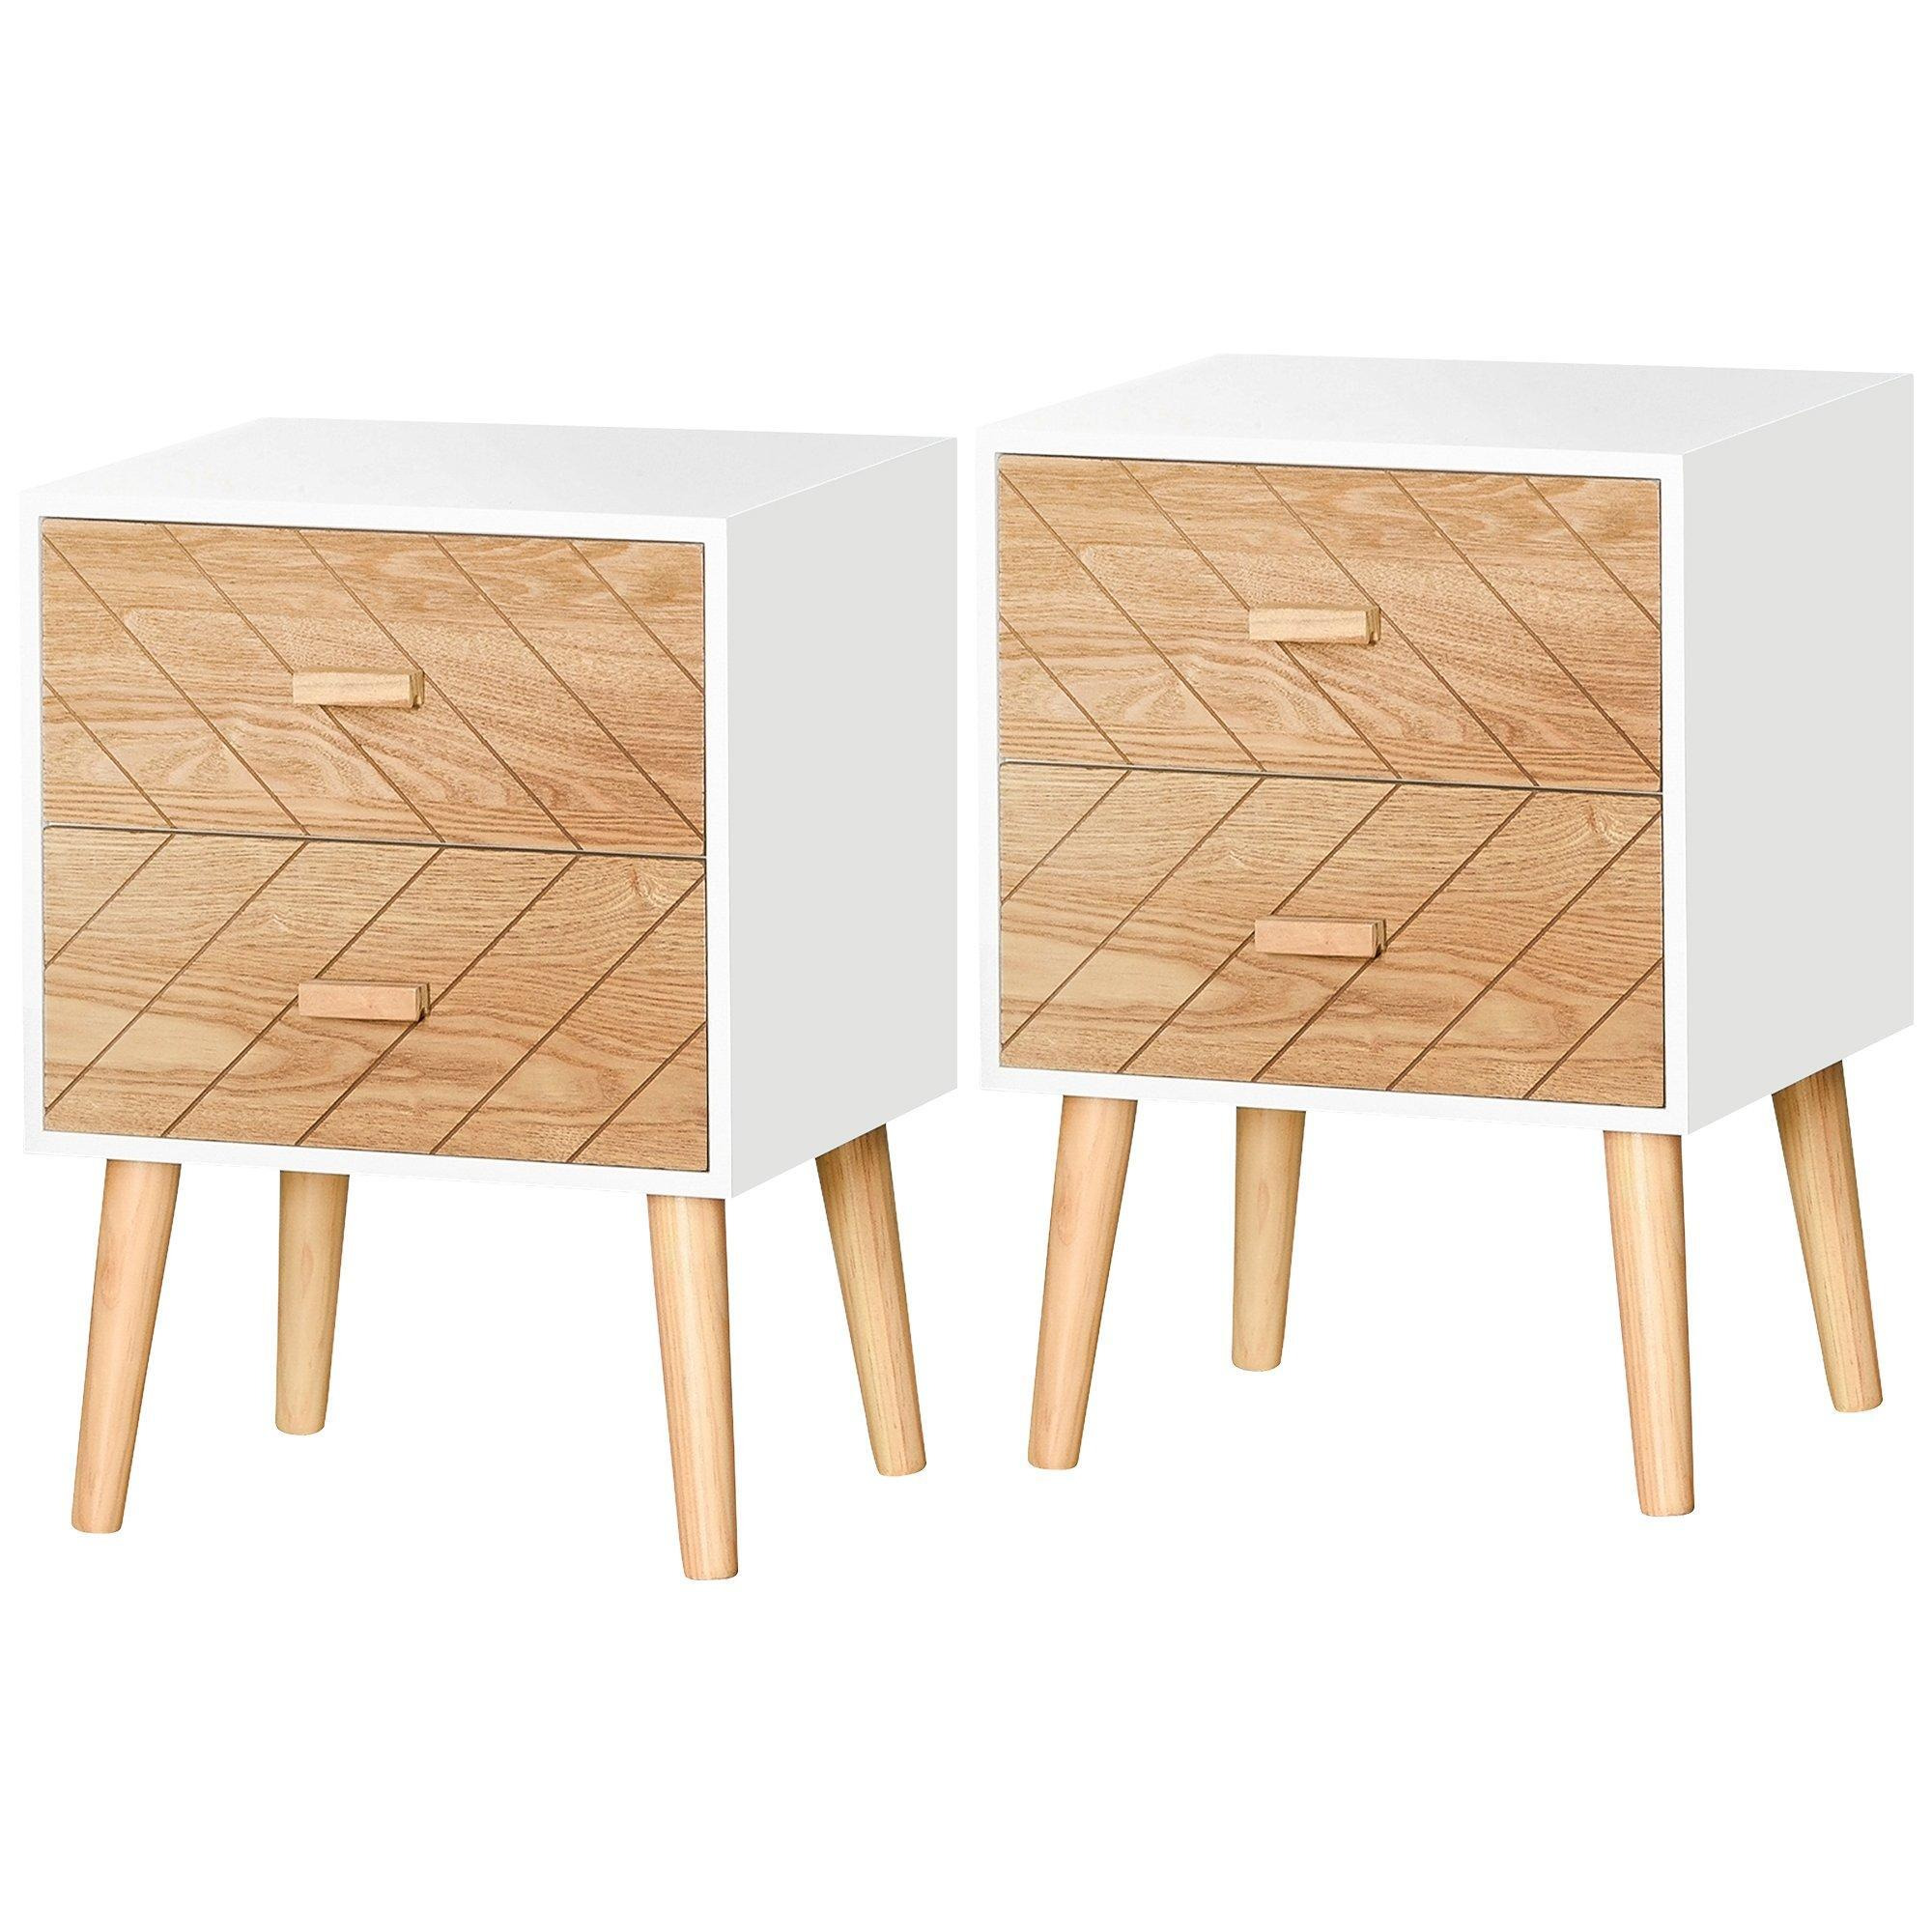 Nordic Style Bedside Table Set of 2 Drawers Cabinet - image 1